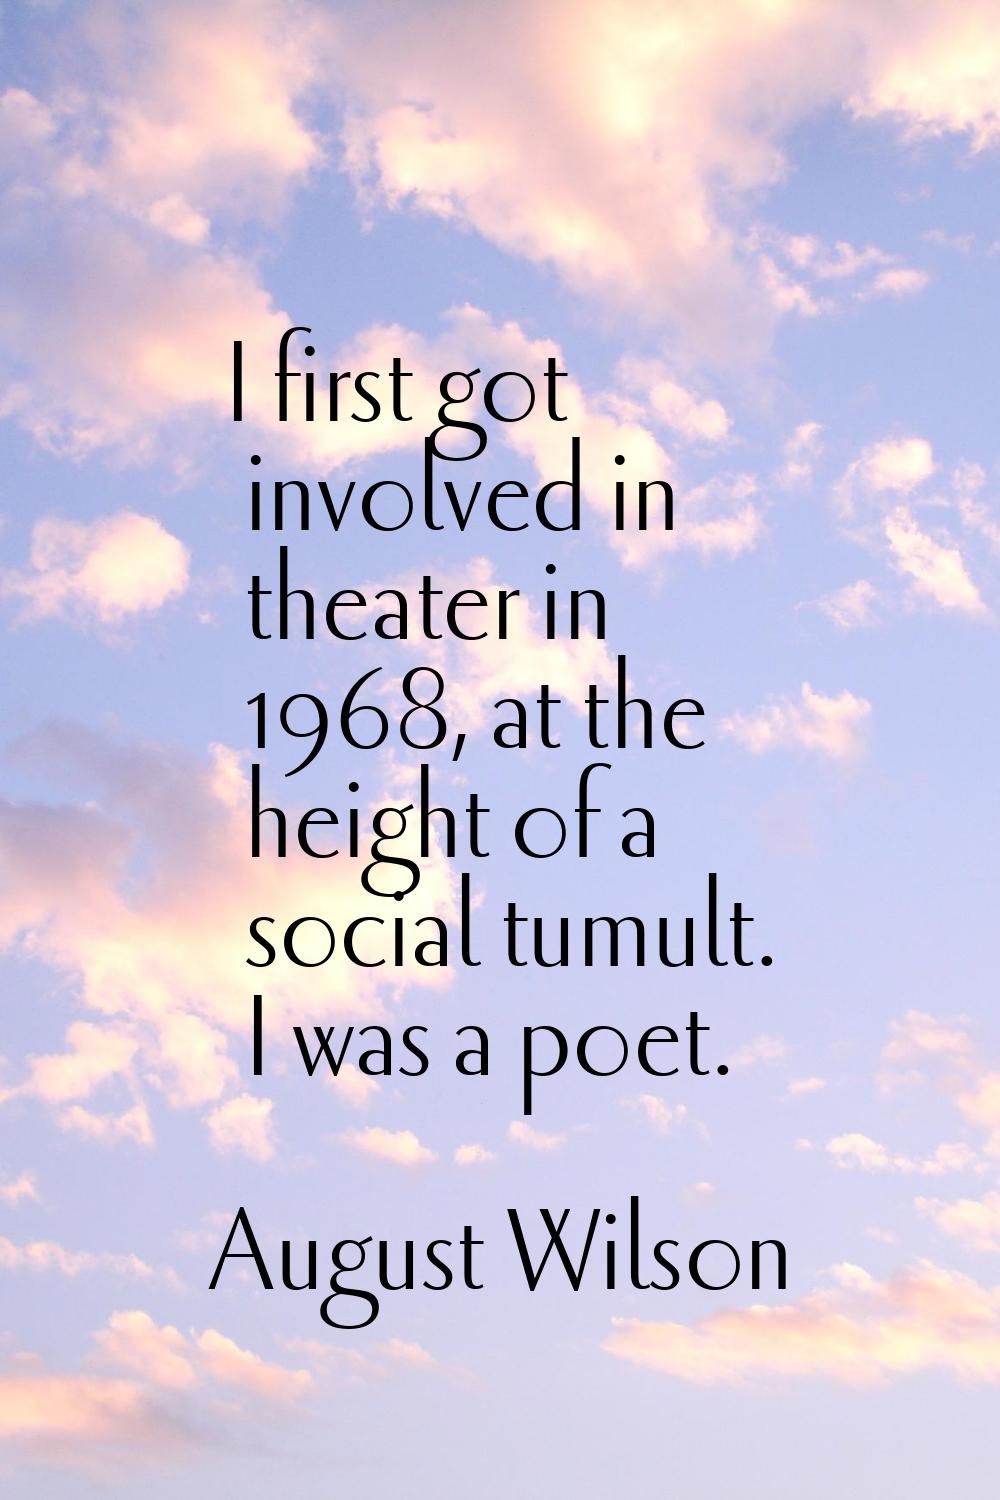 I first got involved in theater in 1968, at the height of a social tumult. I was a poet.